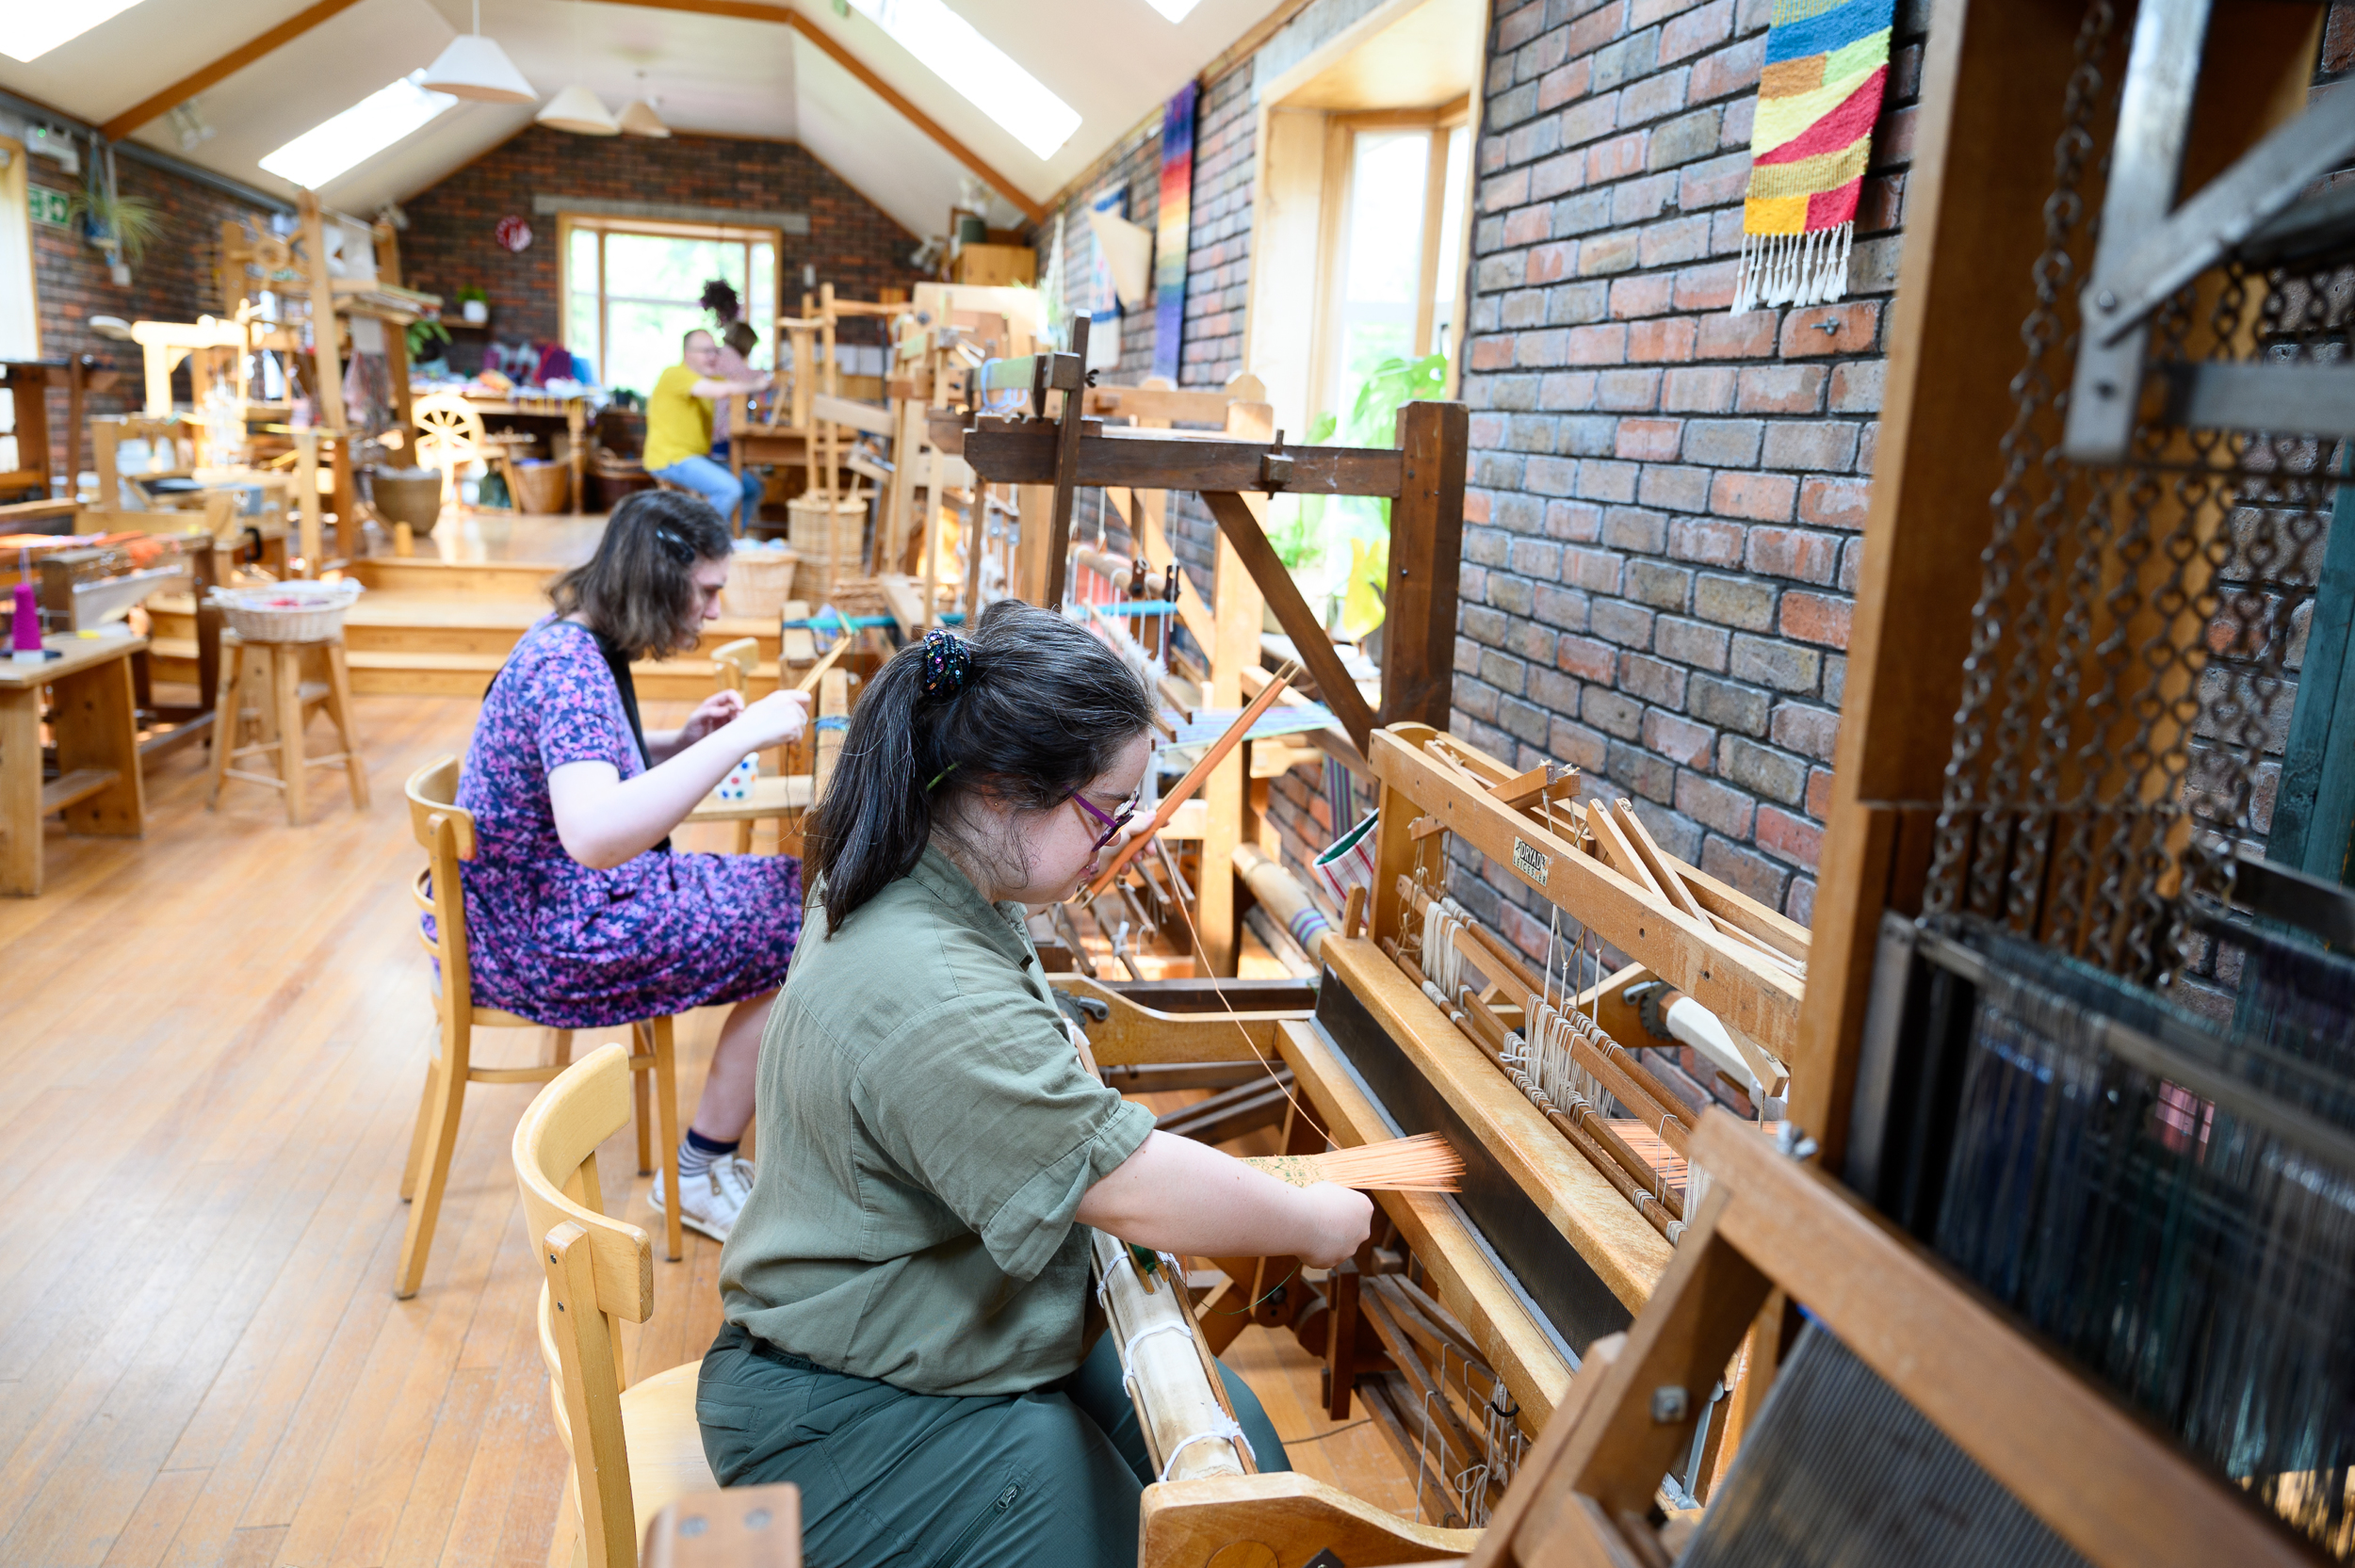 Two students working at the loom in our Weavery